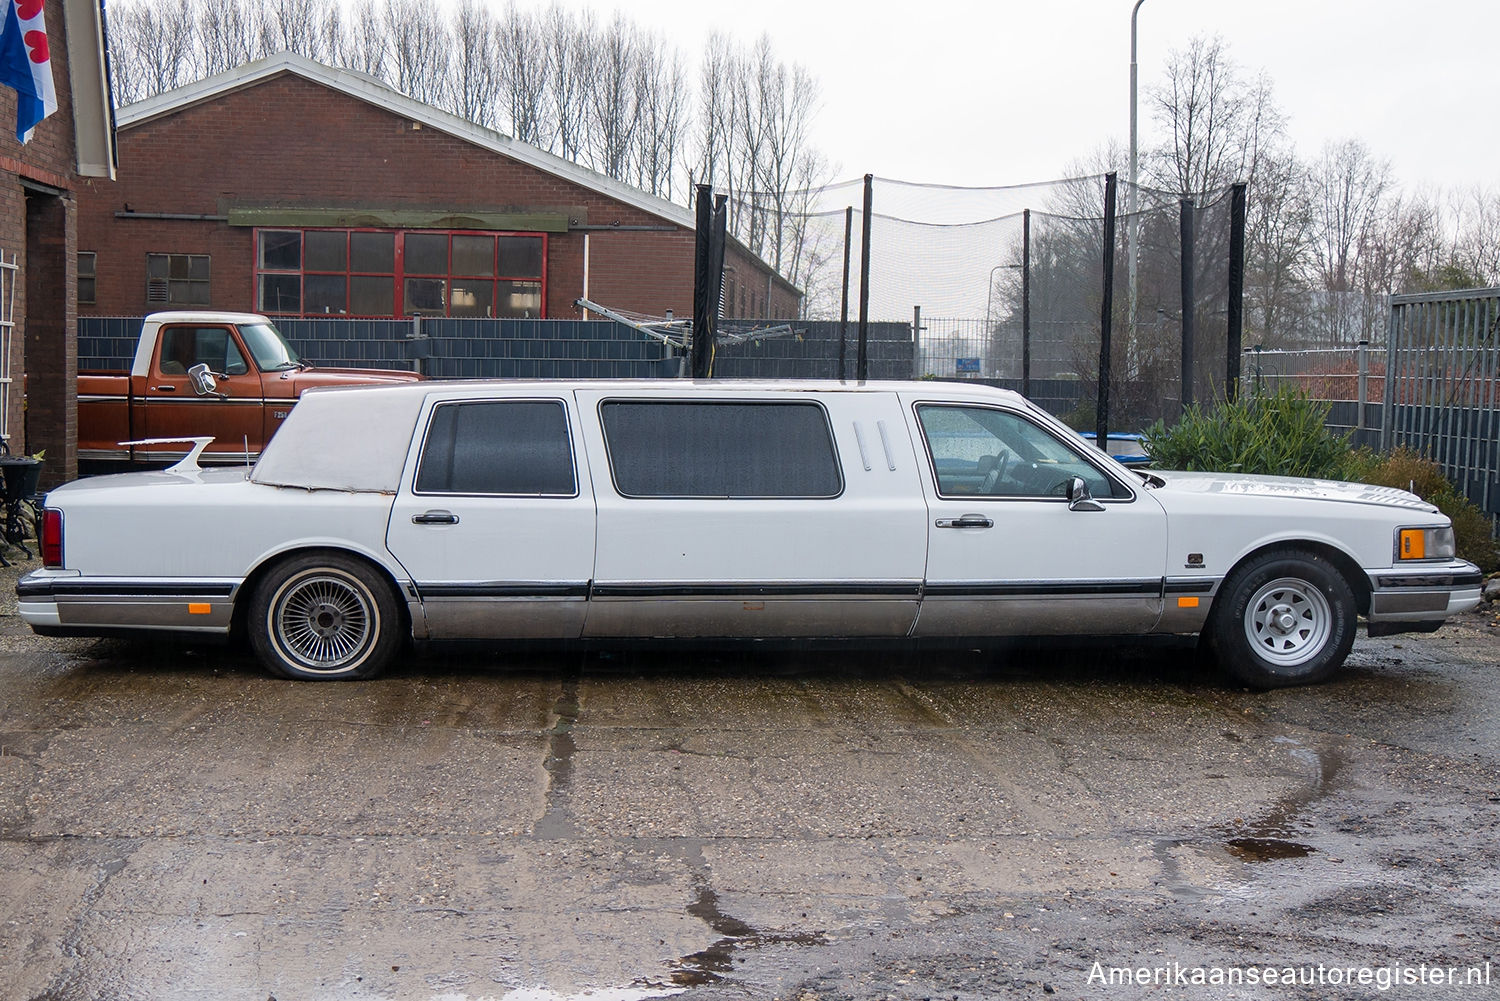 Lincoln Town Car uit 1990